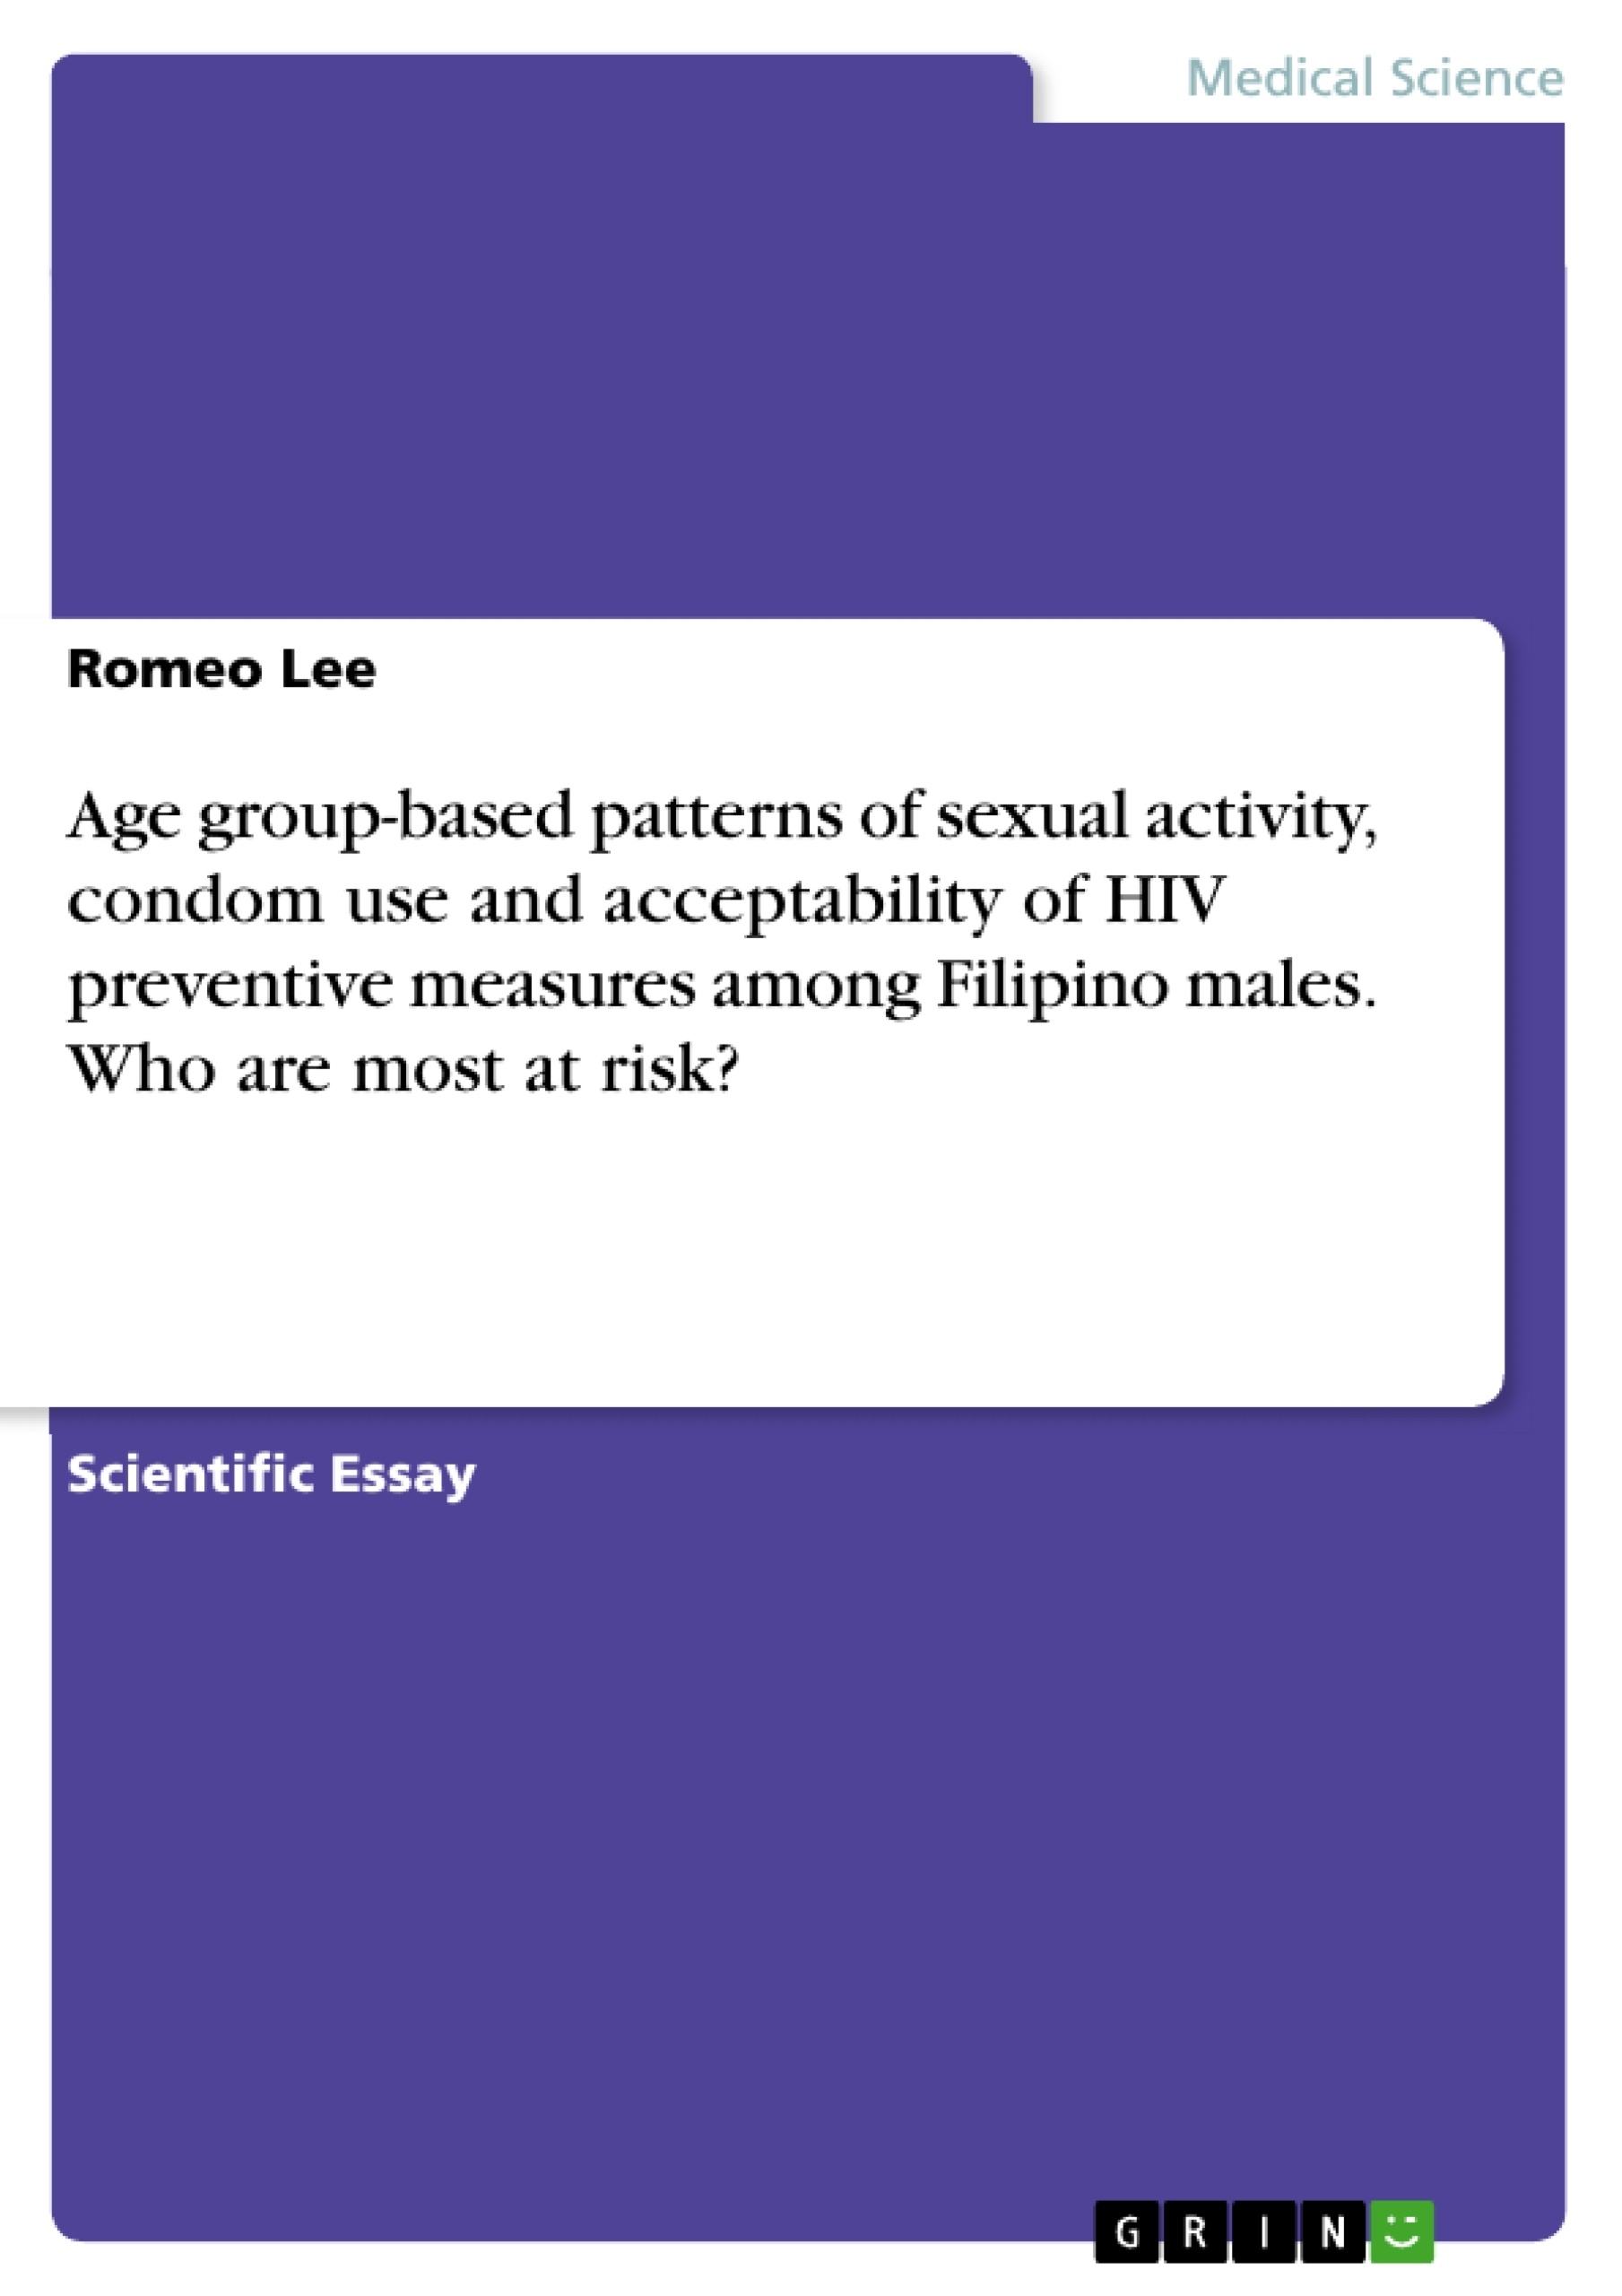 Título: Age group-based patterns of sexual activity, condom use and acceptability of HIV preventive measures among Filipino males. Who are most at risk?